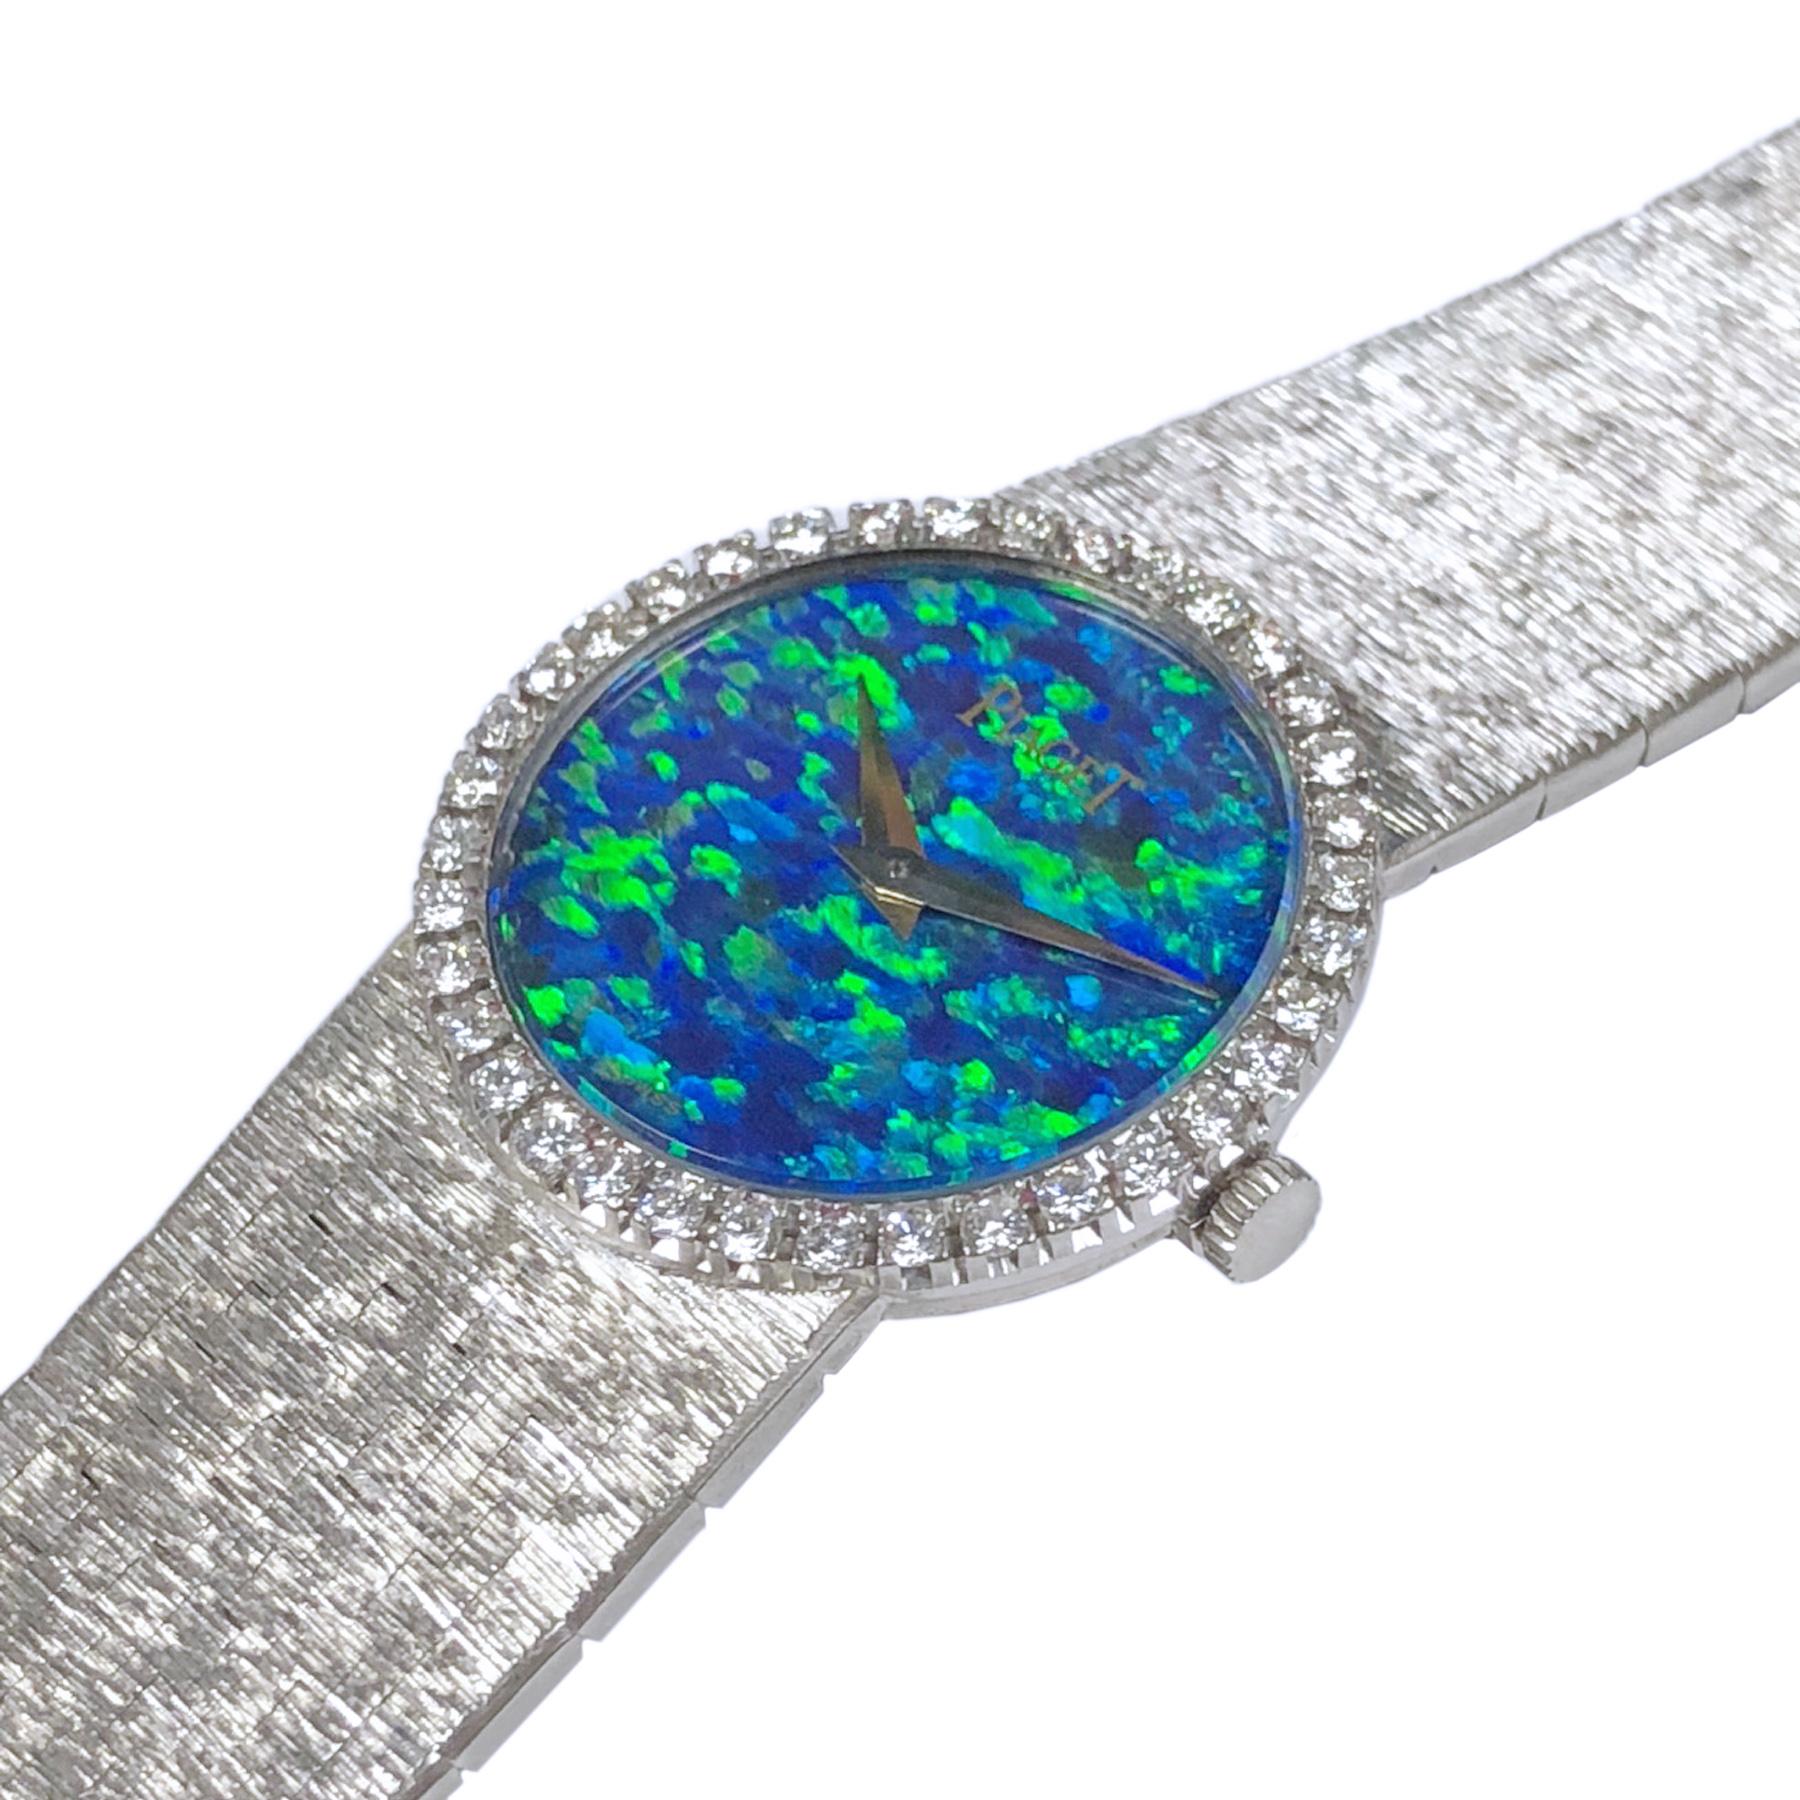 Circa 1970s Piaget ladies Wrist watch, 24 MM 18K White Gold case with Piaget factory set Diamond bezel of Round Brilliant cuts totaling approximately 1 carat. Opal Dial of Fiery color Blues, greens Reds. 17 Jewel mechanical, manual wind movement.